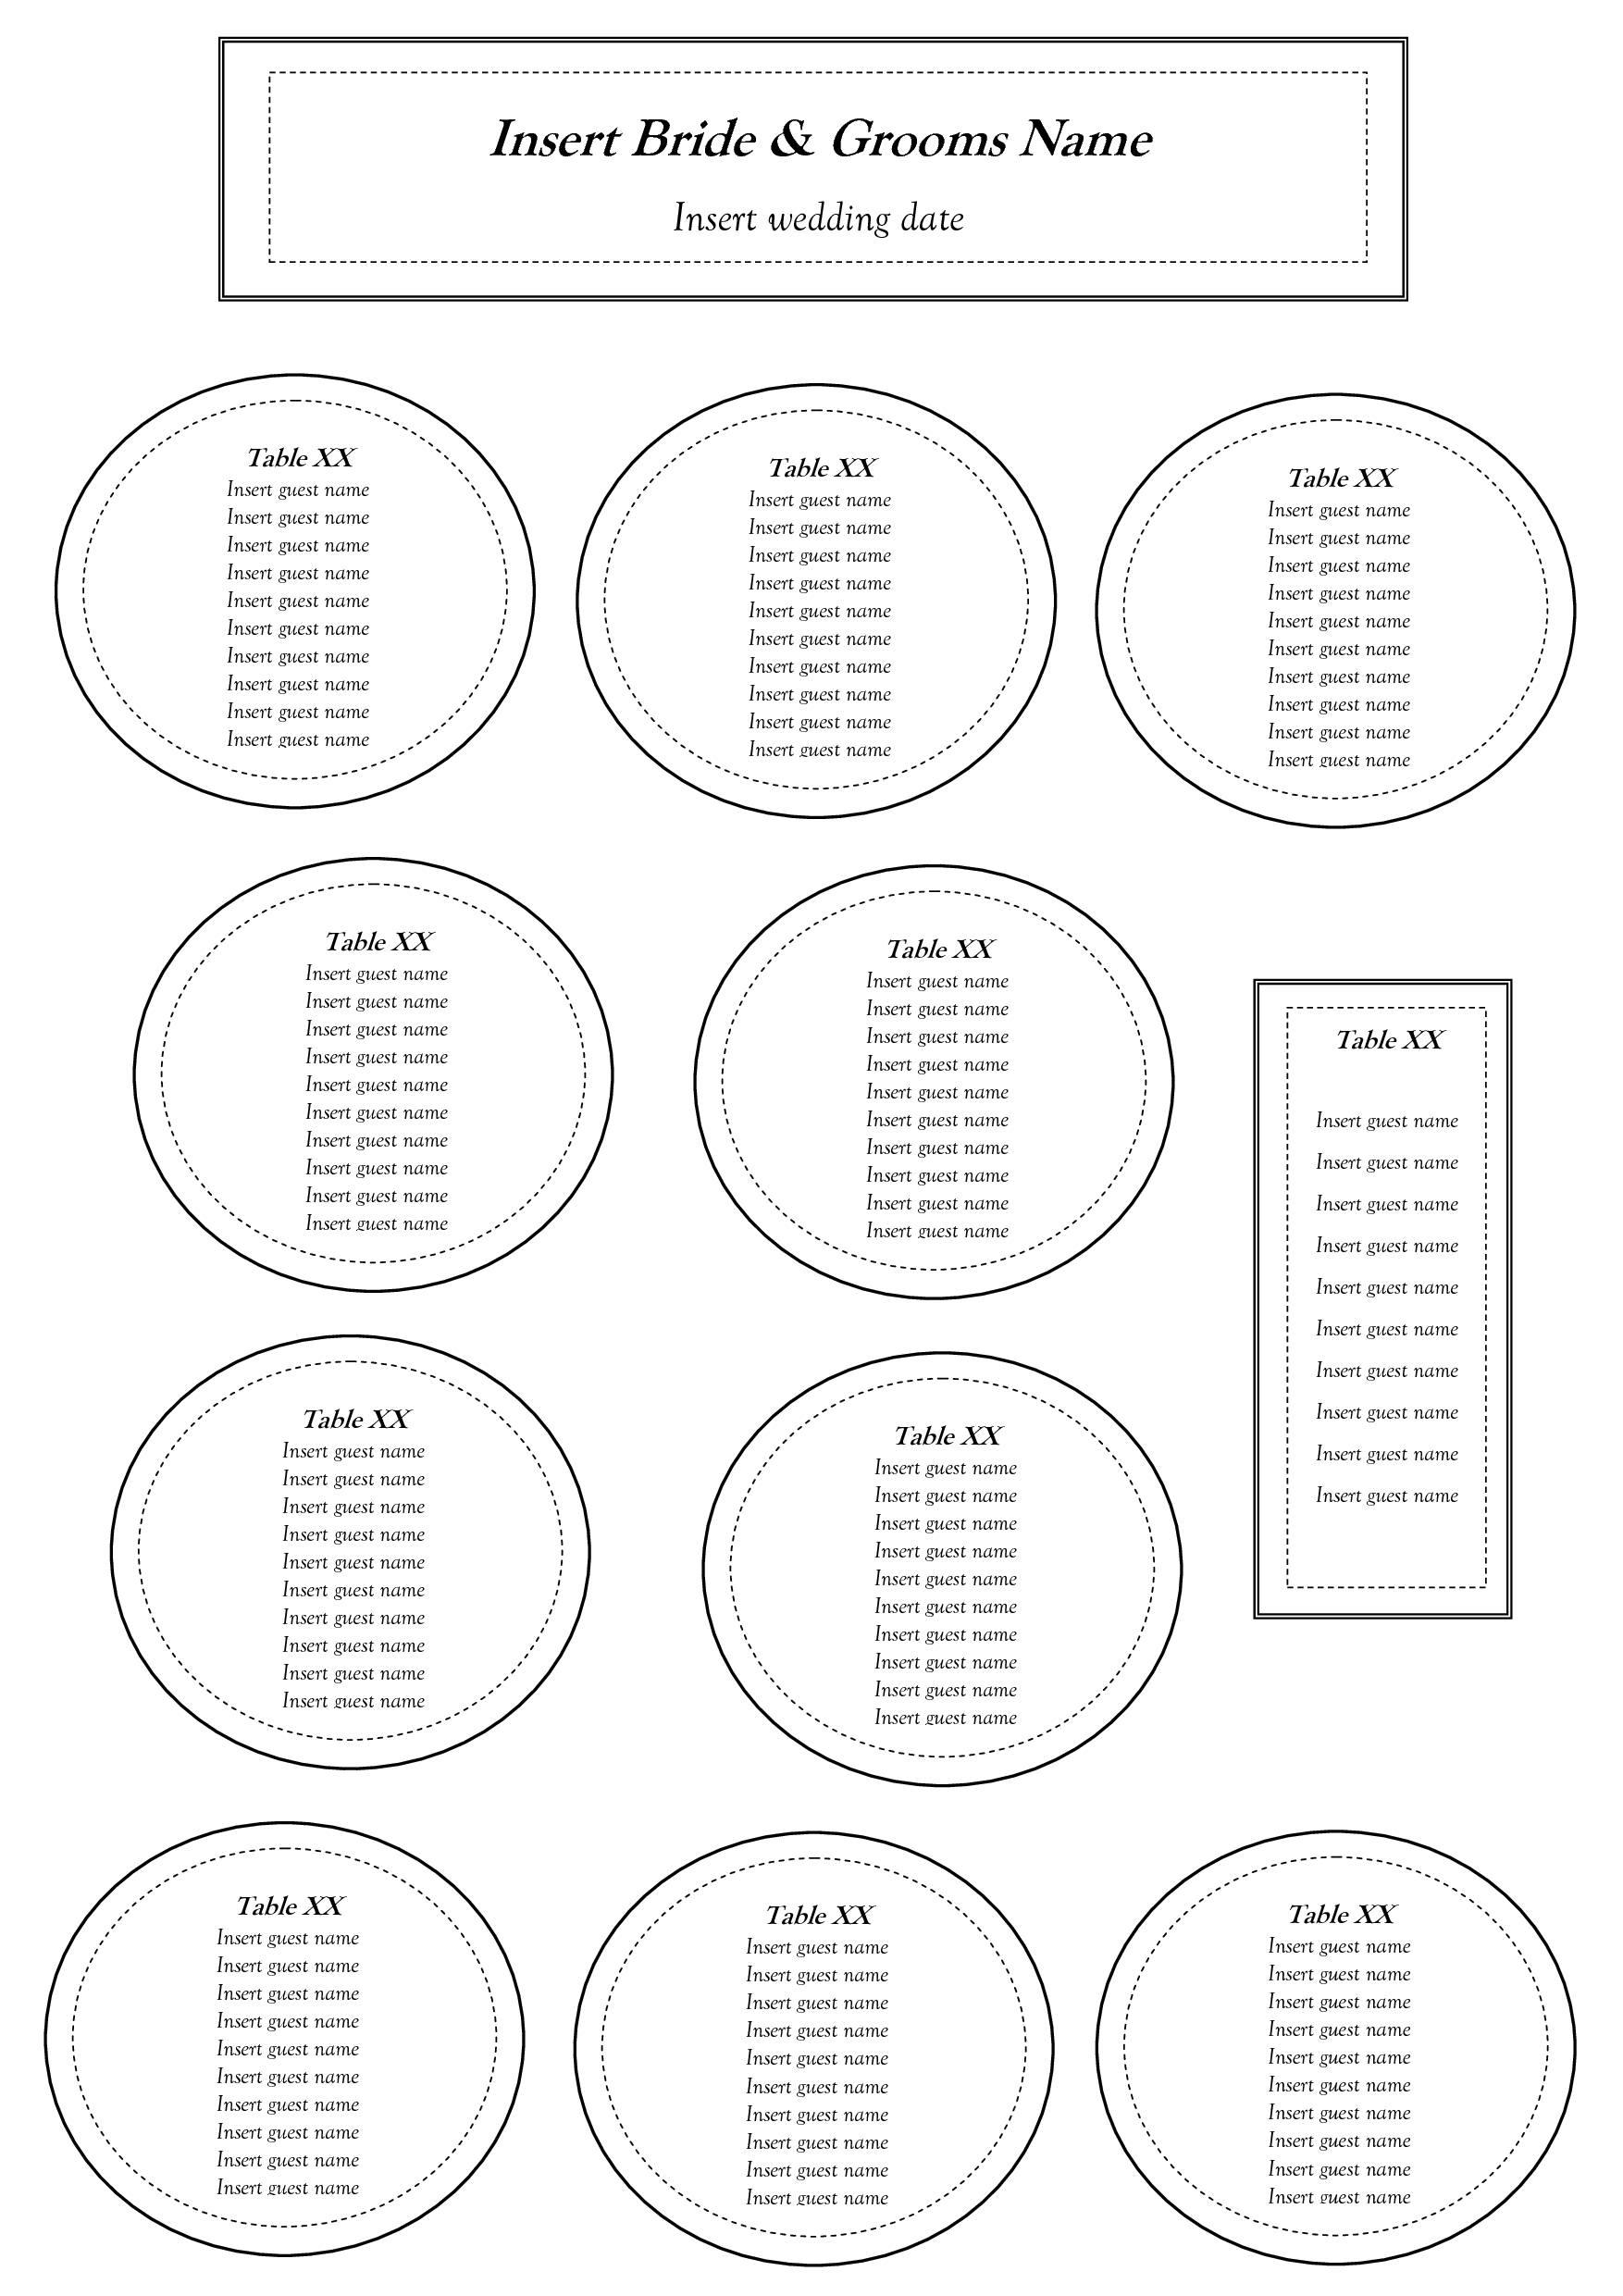 Free Table Seating Chart Template | Seating Charts In 2019 intended for Printable Church Seating Chart Template